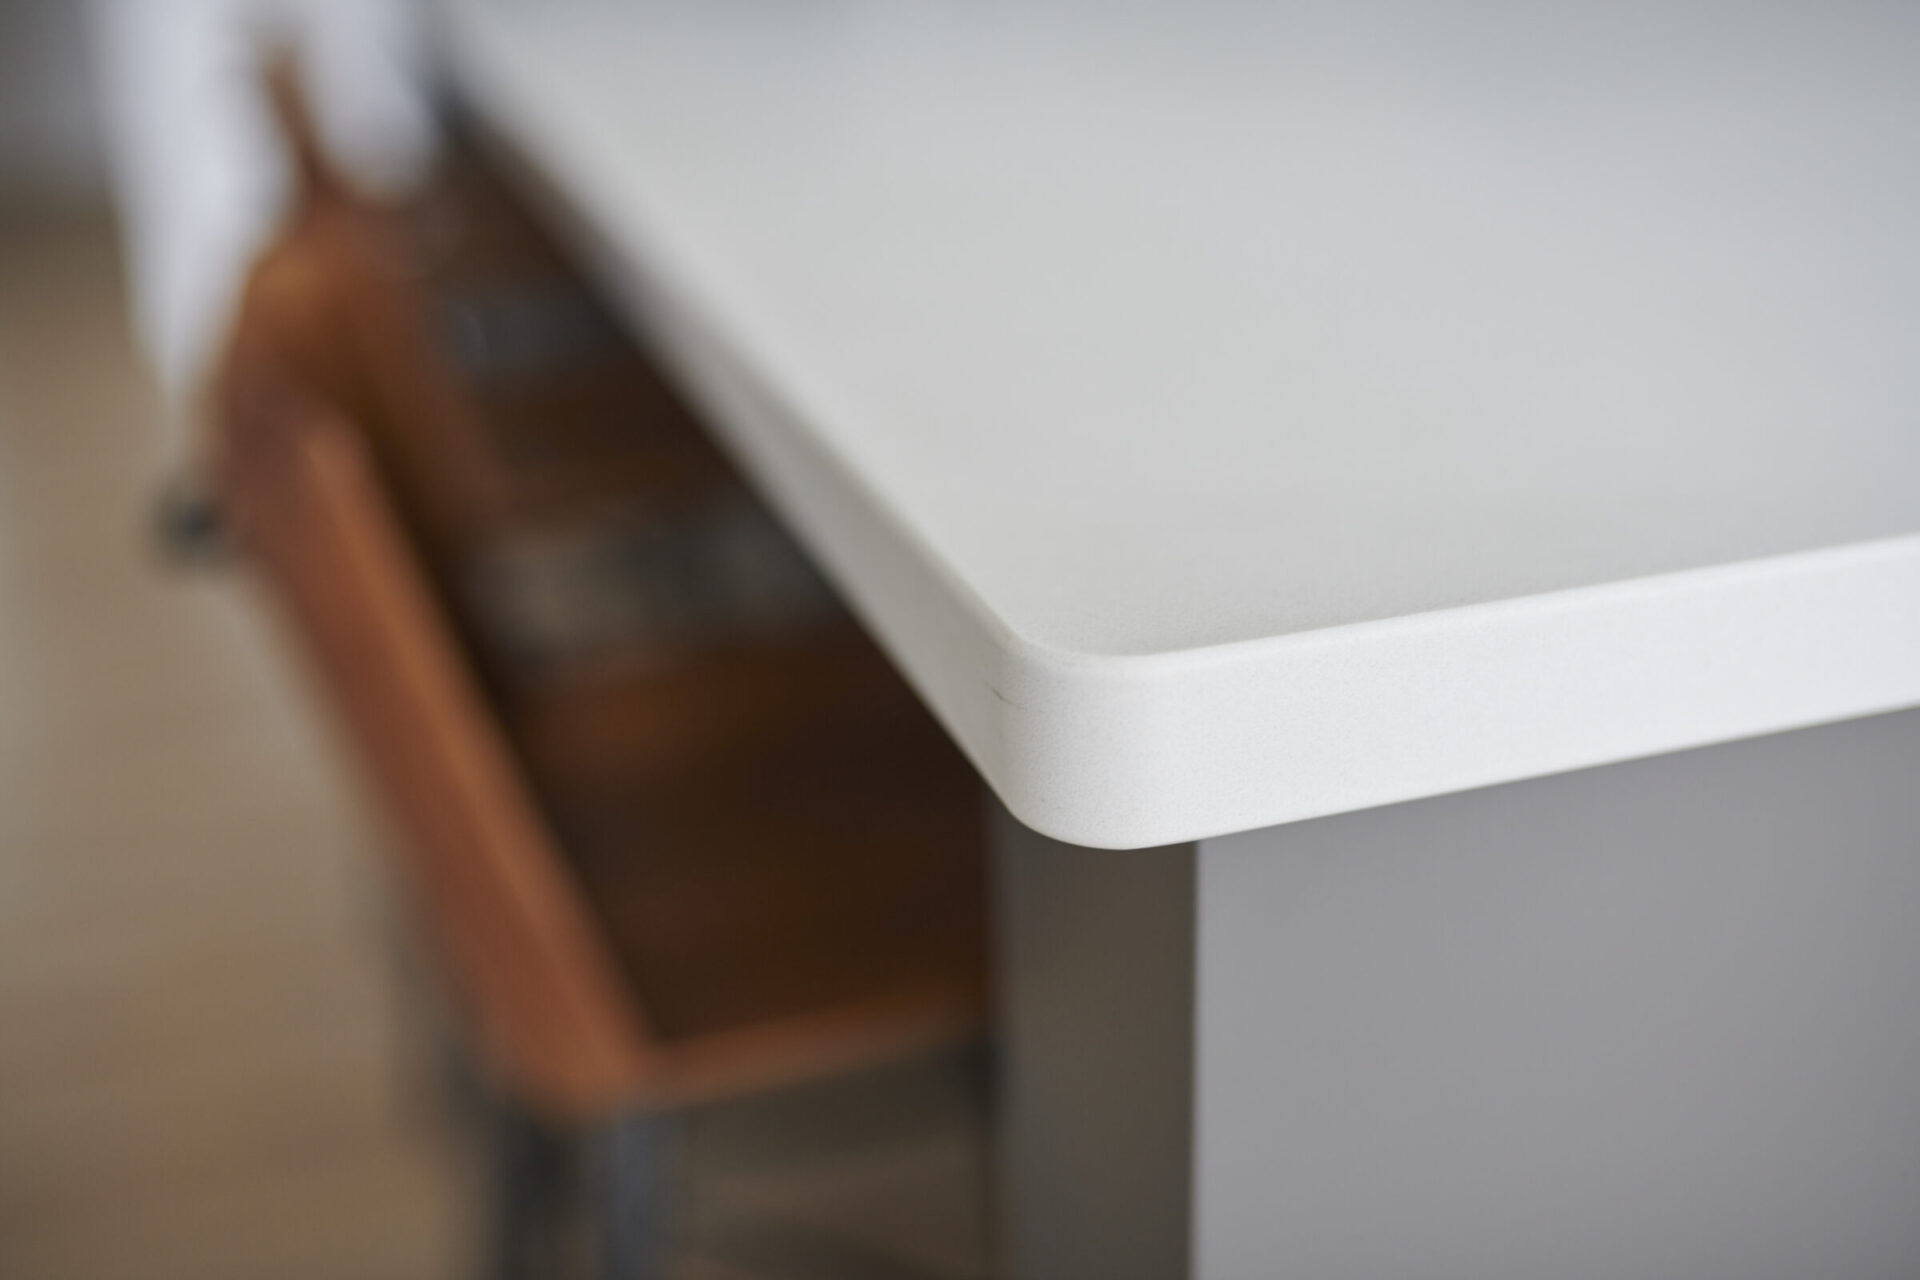 A close-up photo highlighting the edge of a white table with a blurred wooden chair in the background, emphasizing texture and simple modern design.